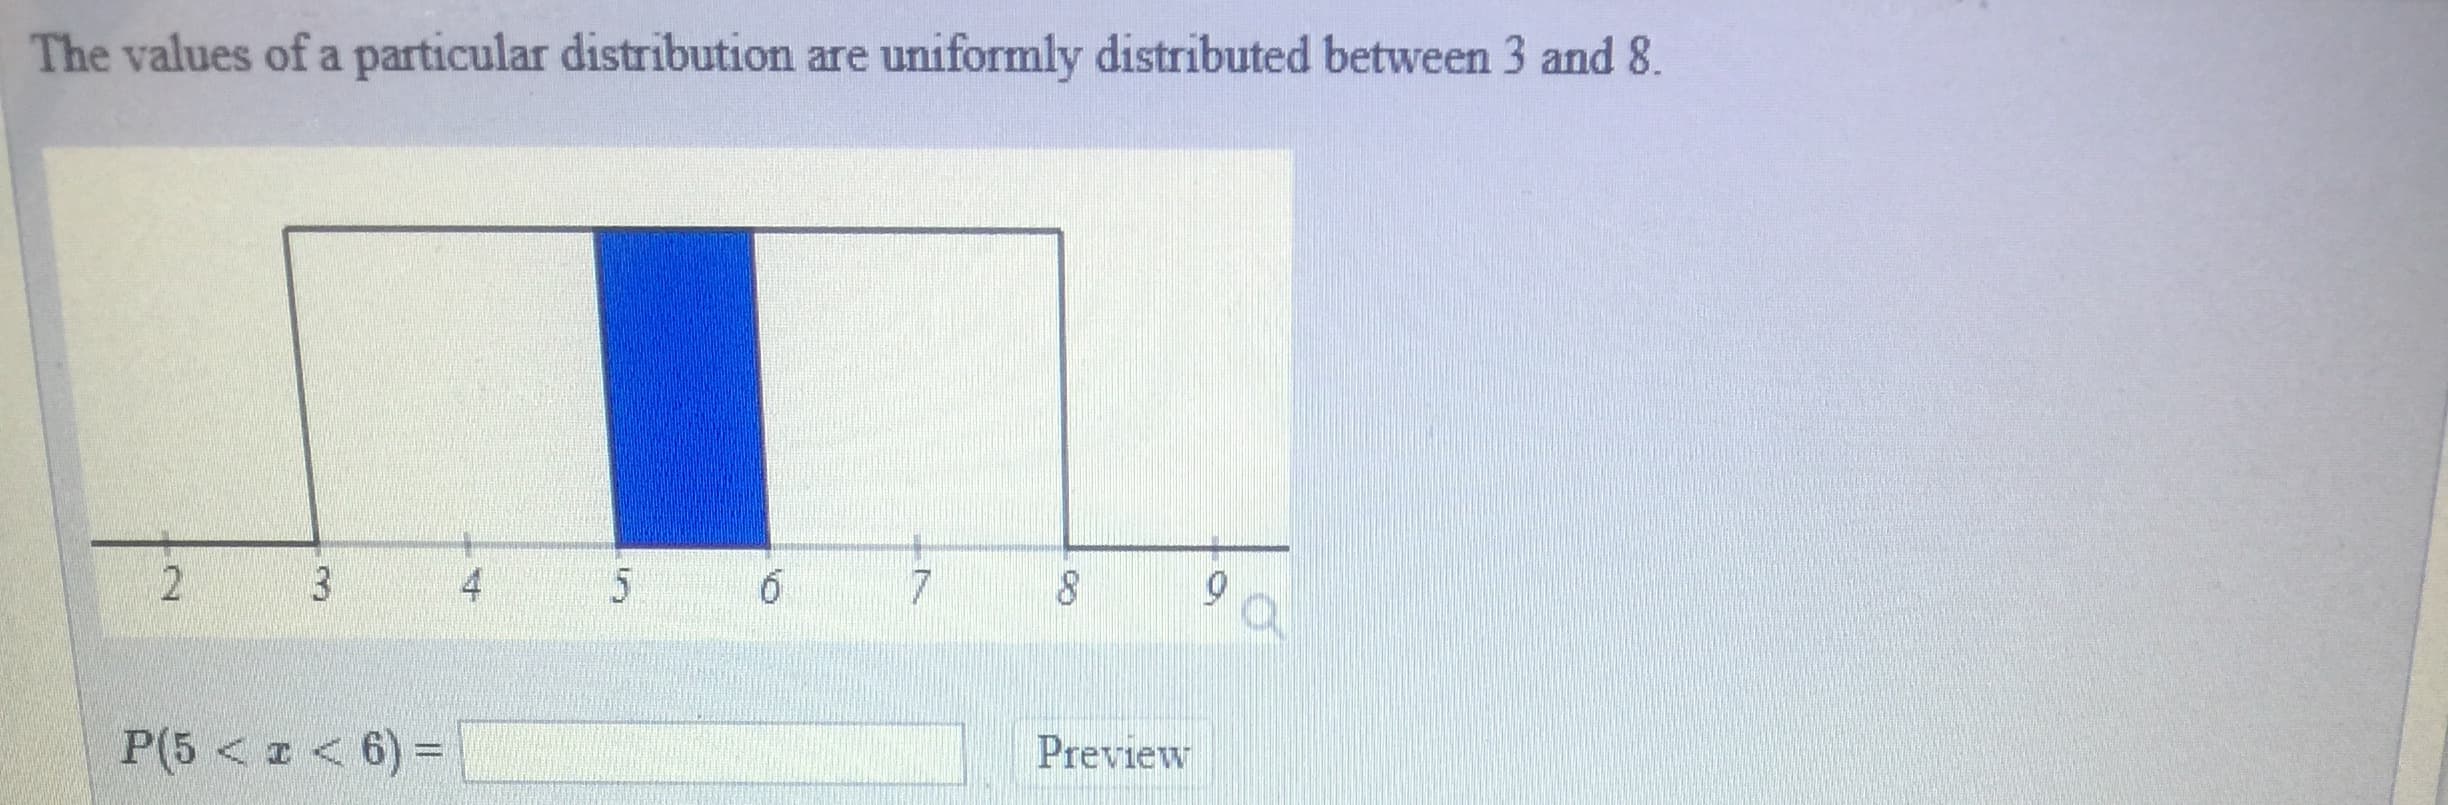 The values of a particular distribution are uniformly distributed between 3 and 8
P6 <z< 6)-
Preview
